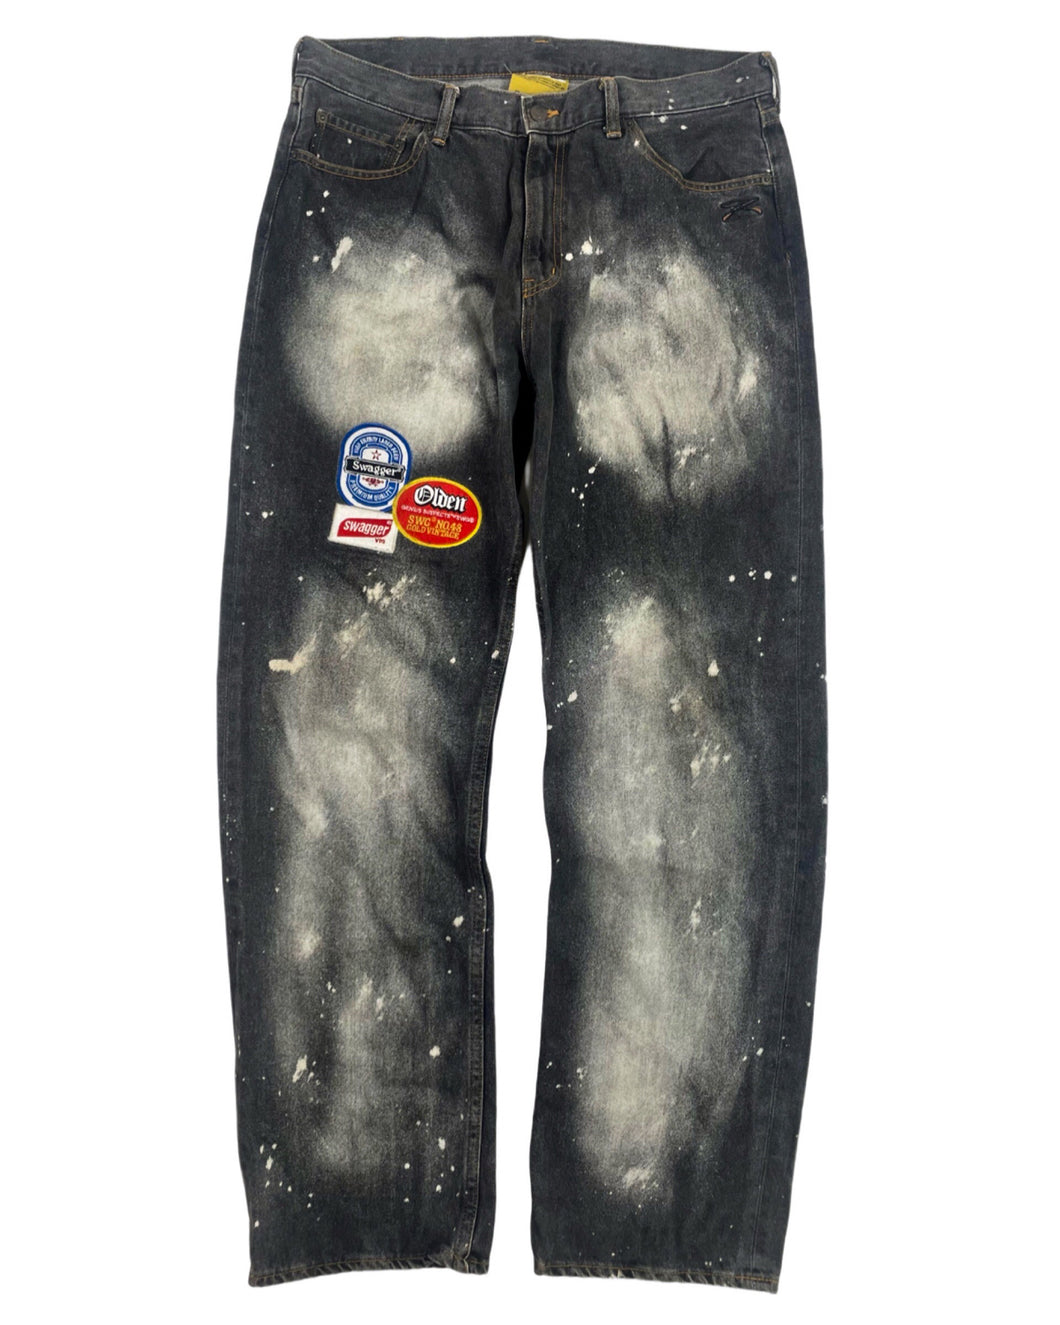 SWAGGER Patched Painter Denim (2010)(32-34”)